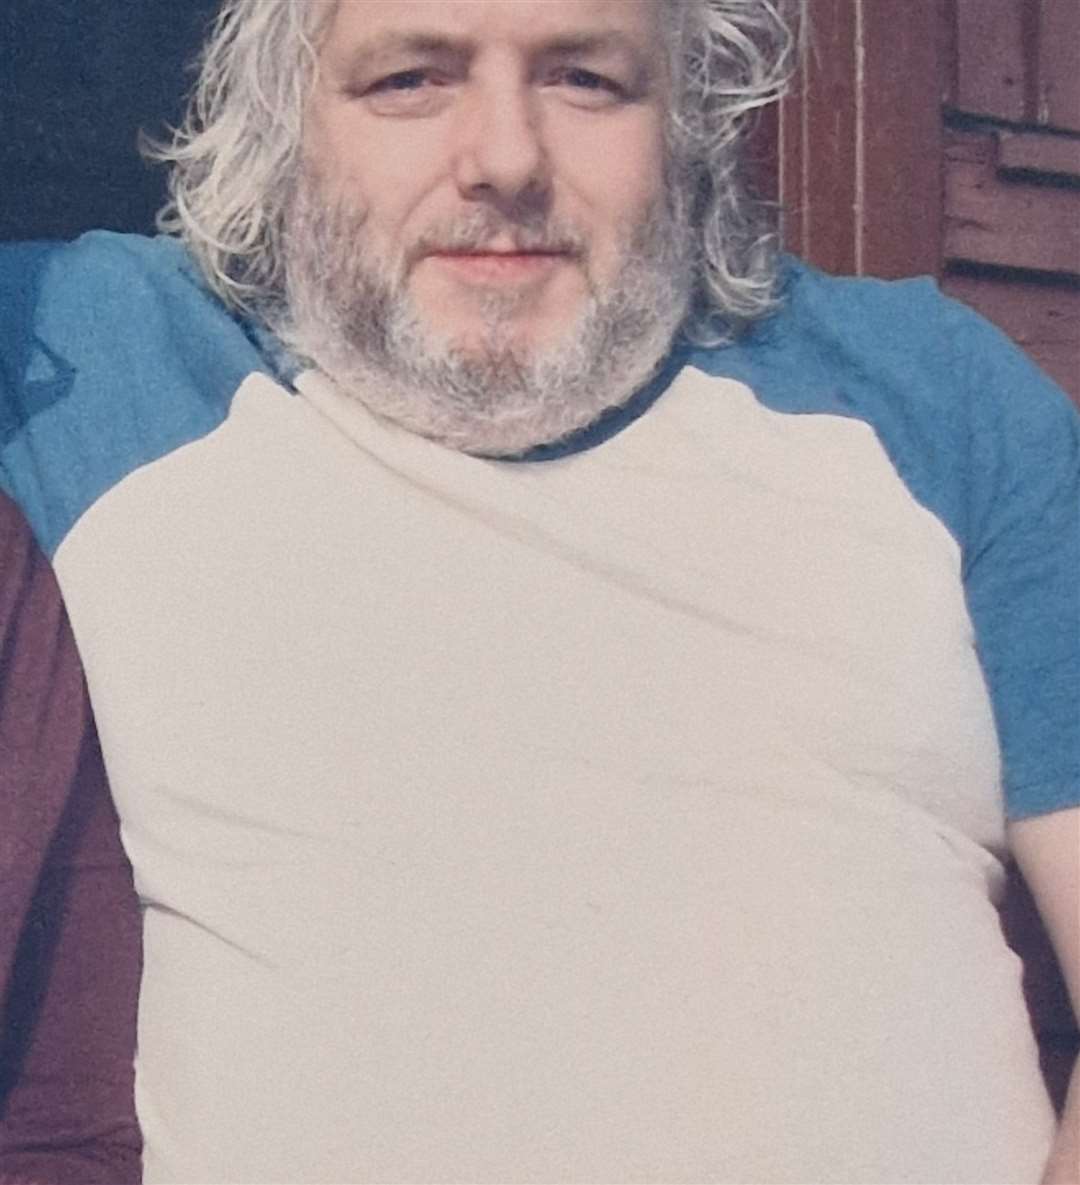 Police have issued this photograph of John Prentice, posted missing today.